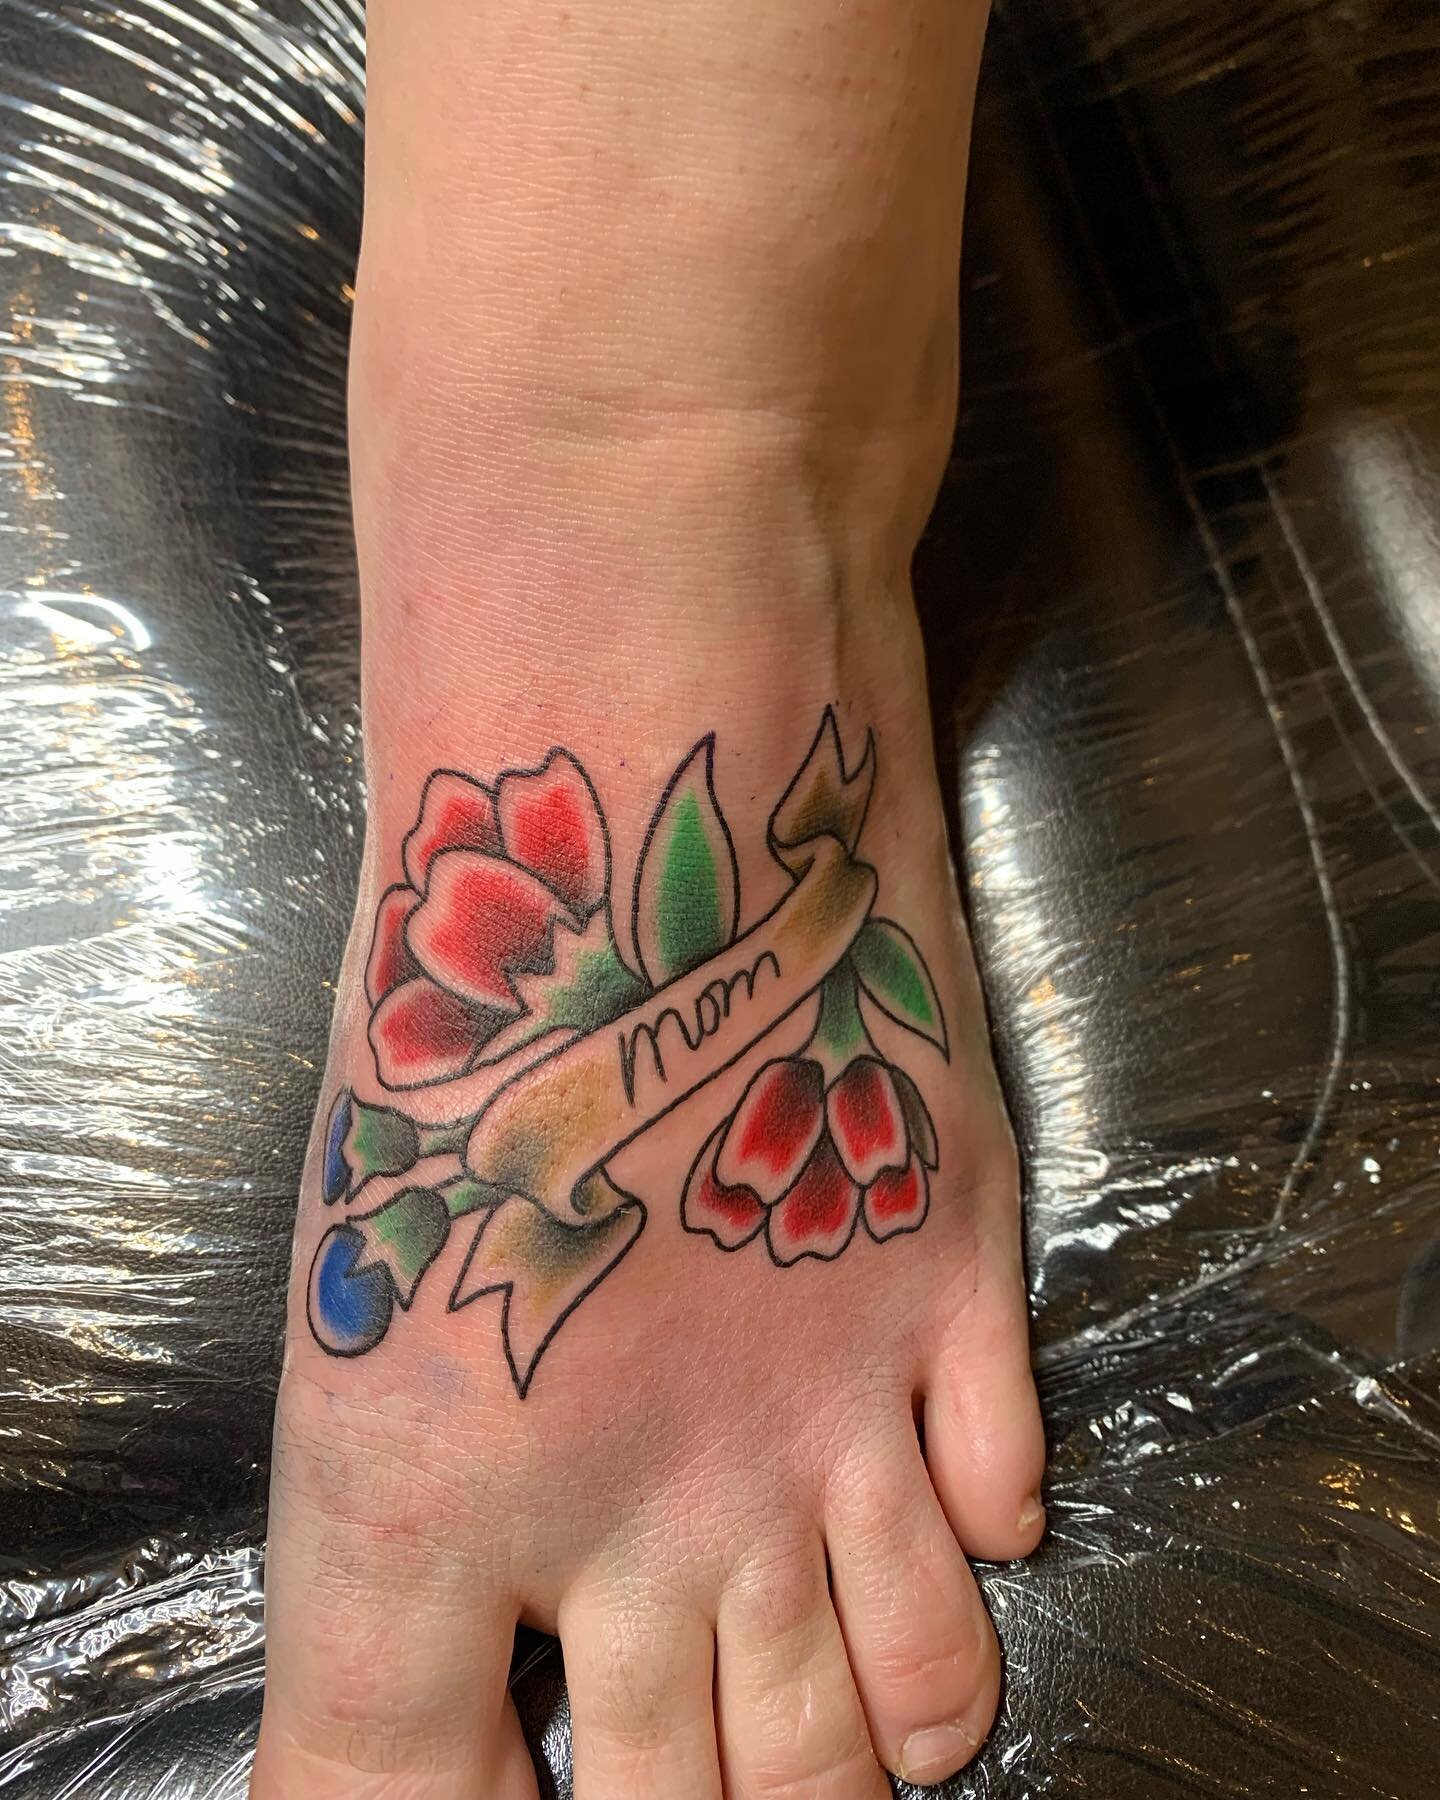 Just finished another mom tat from our flash sale! @tattoosbymarktyler